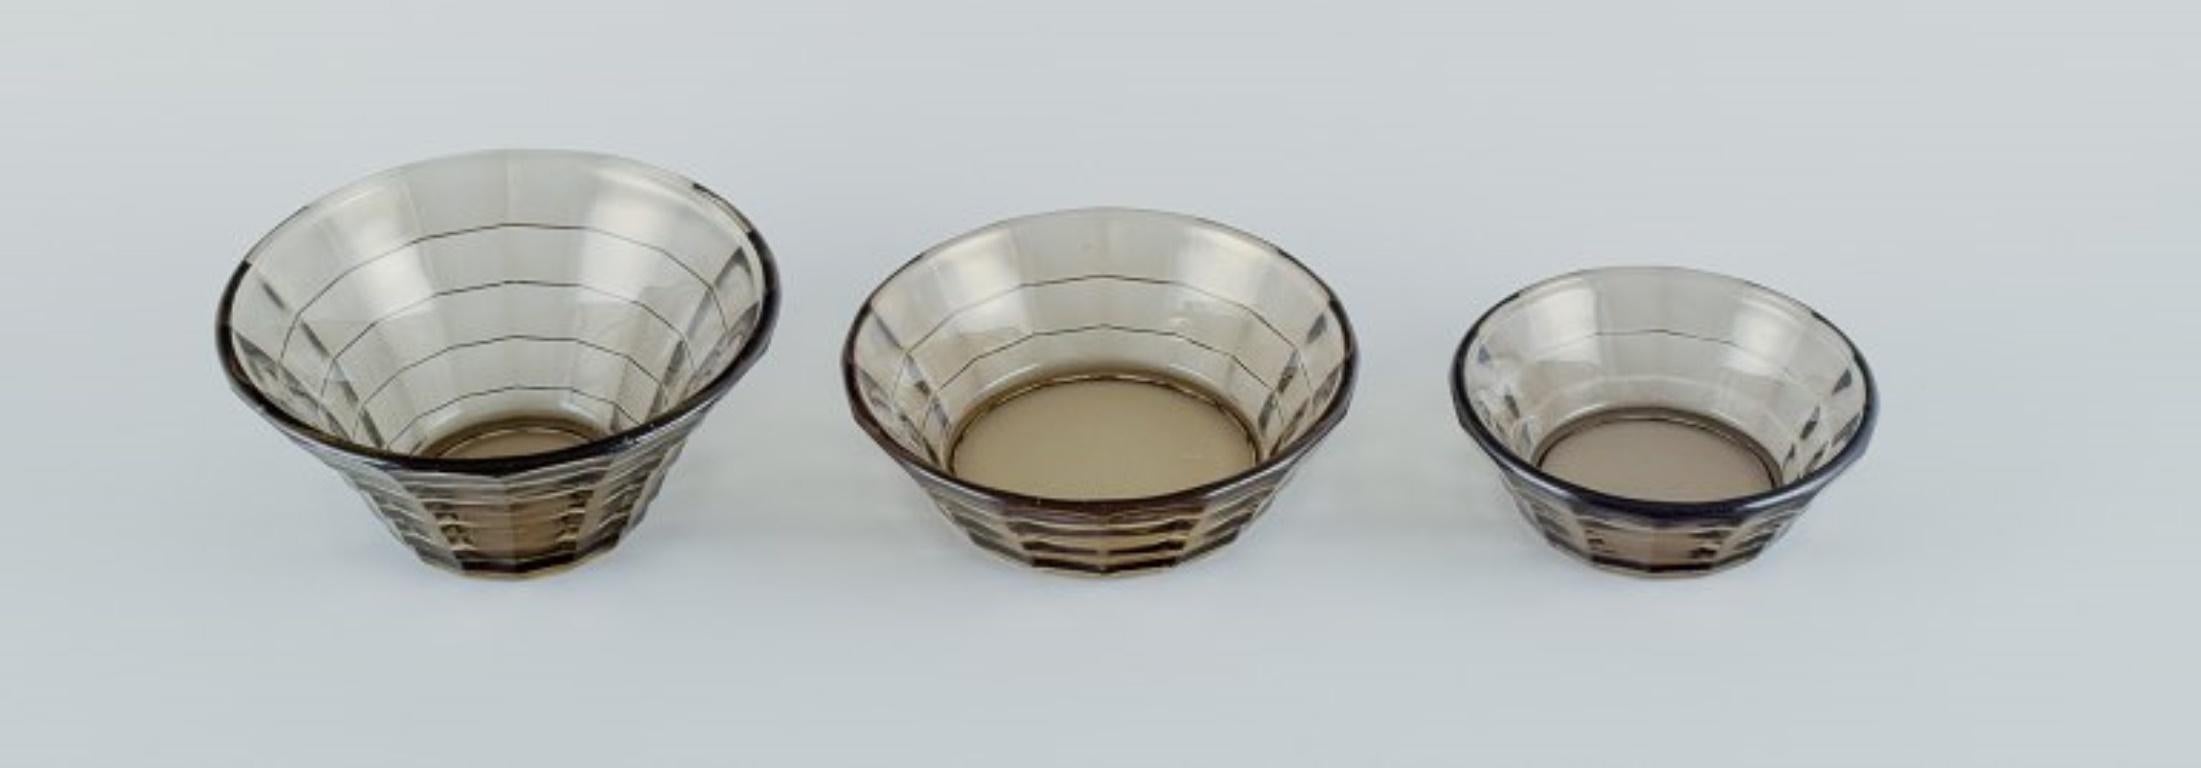 Simon Gate (1883-1945) for Orrefors/Sandvik, Sweden.
Set of three Art Deco bowls in smoked-coloured pressed glass.
Model G756.
Approximately from the 1940s.
In perfect condition.
Largest: D 13.5 cm x H 6.0 cm.